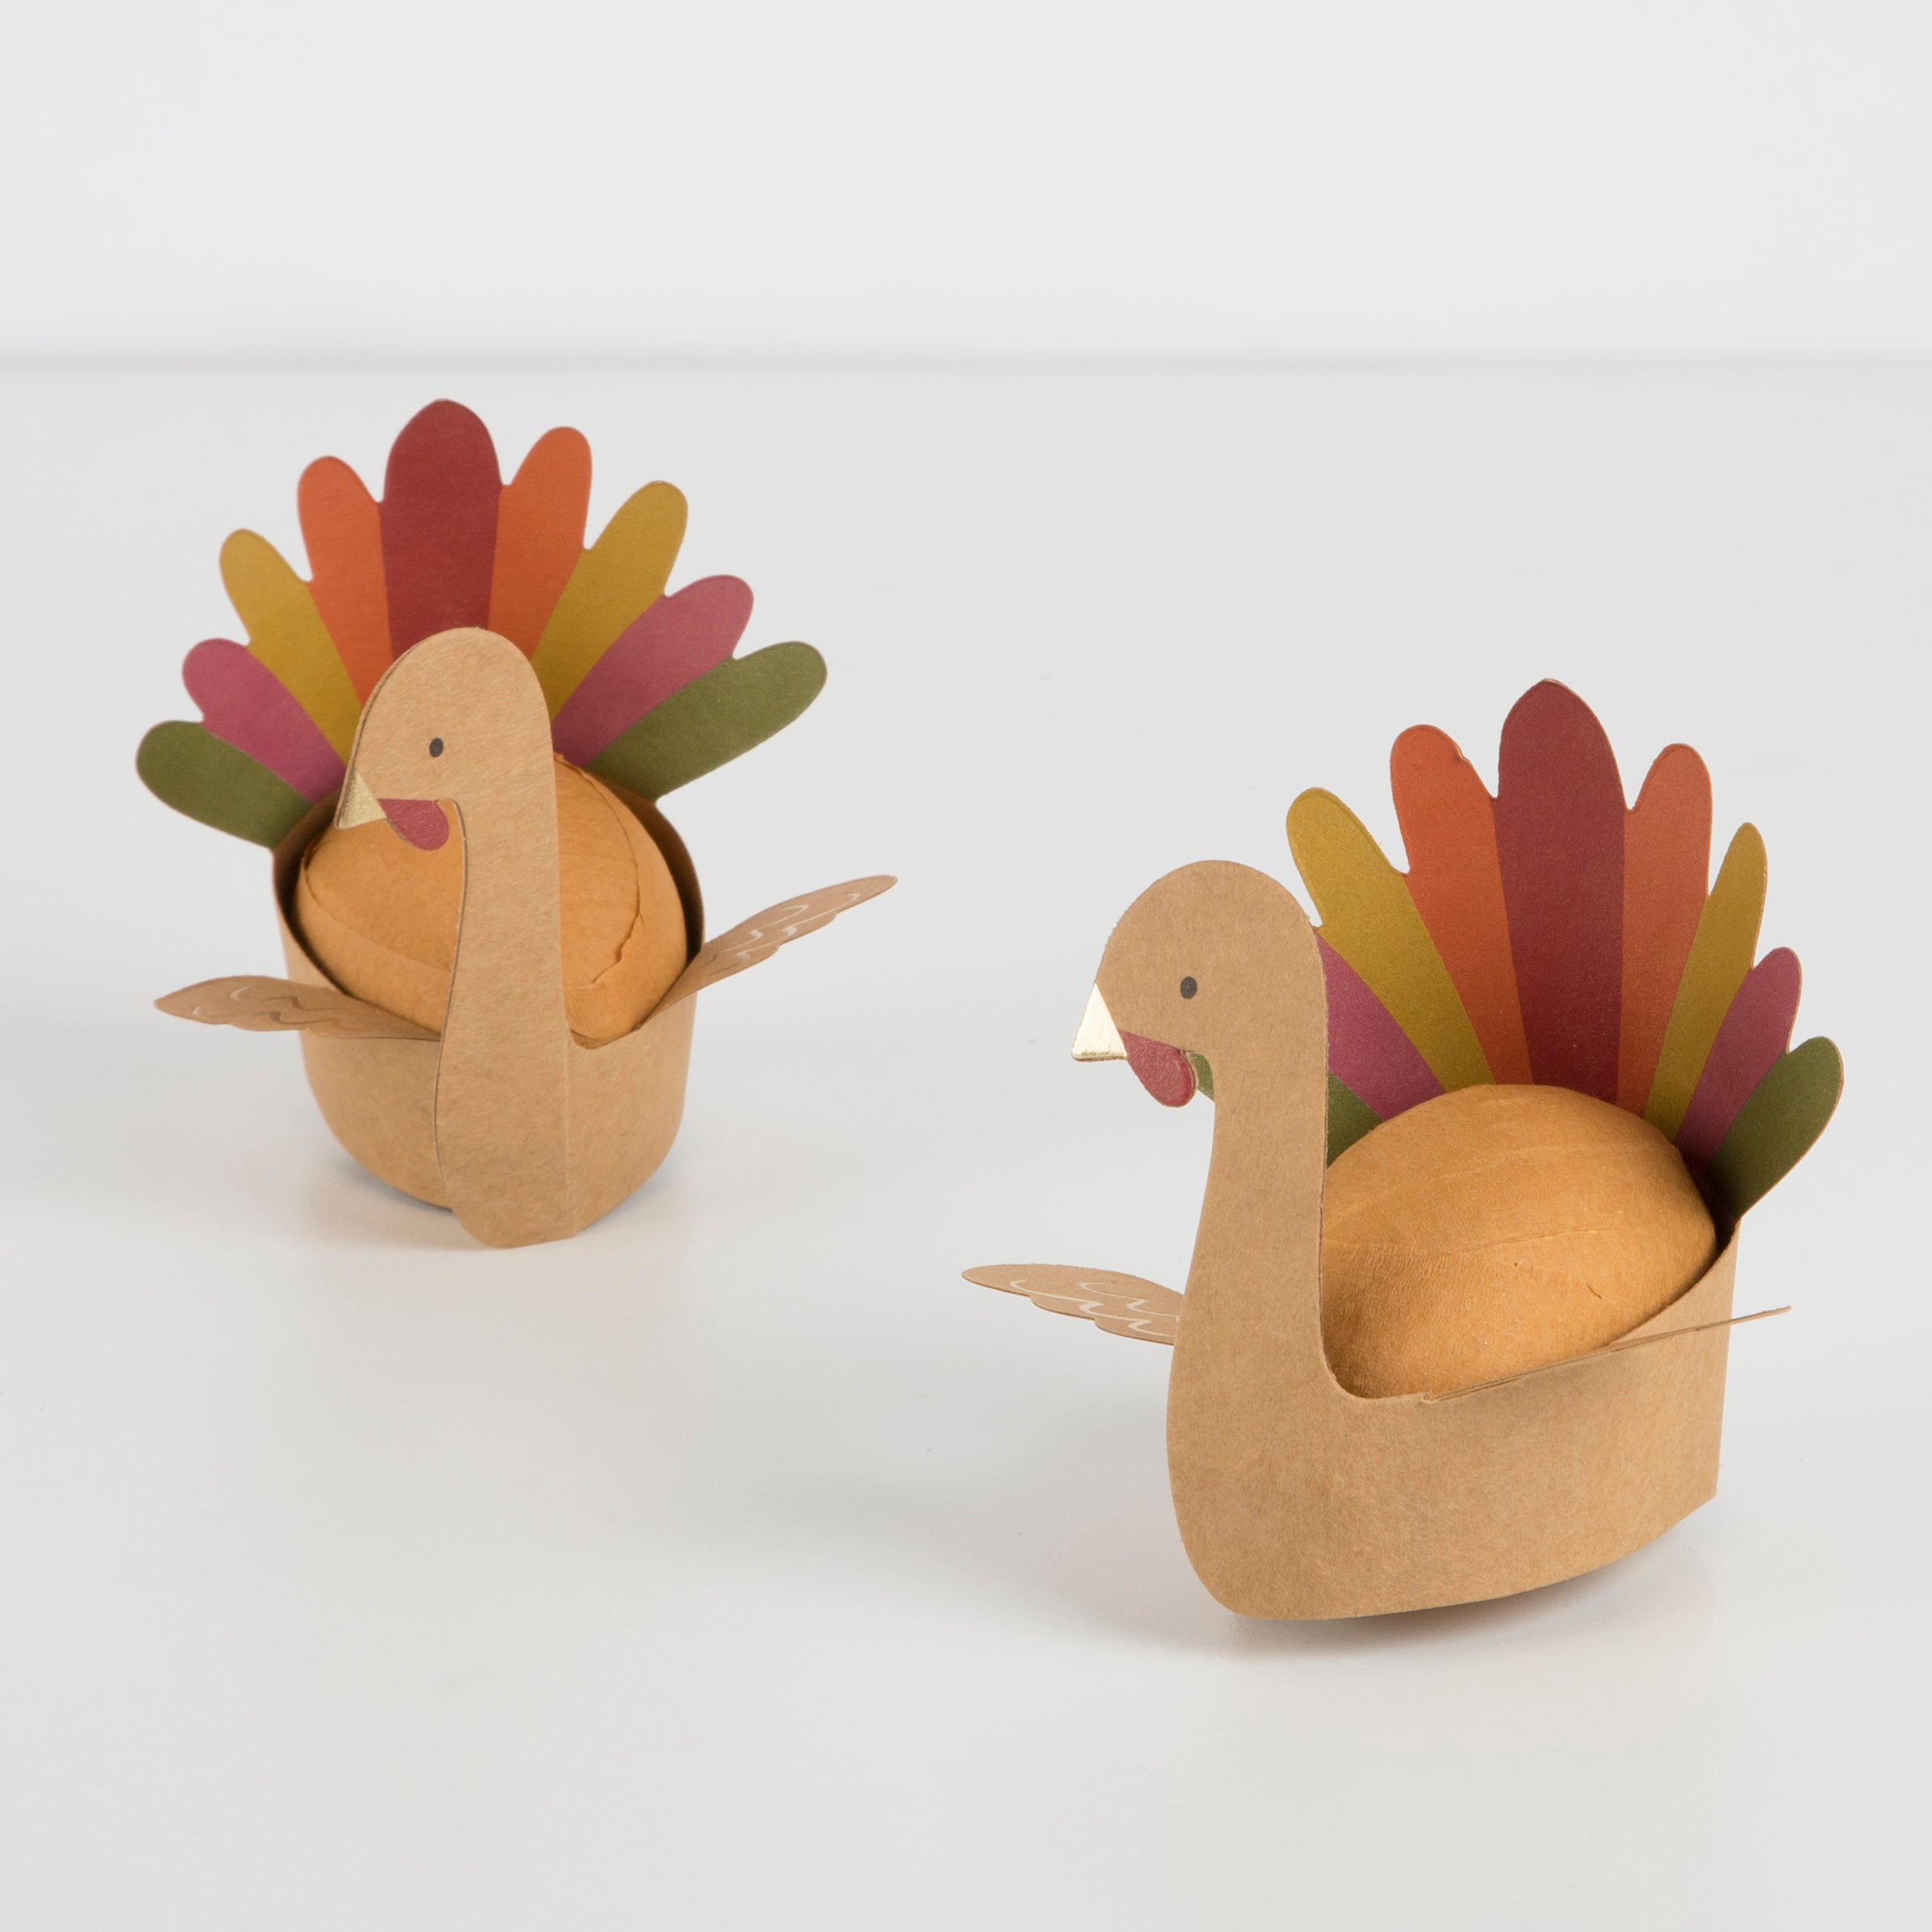 If you're looking for Thanksgiving table decor ideas, then our surprise balls in the shape of turkeys, are a fabulous treat.